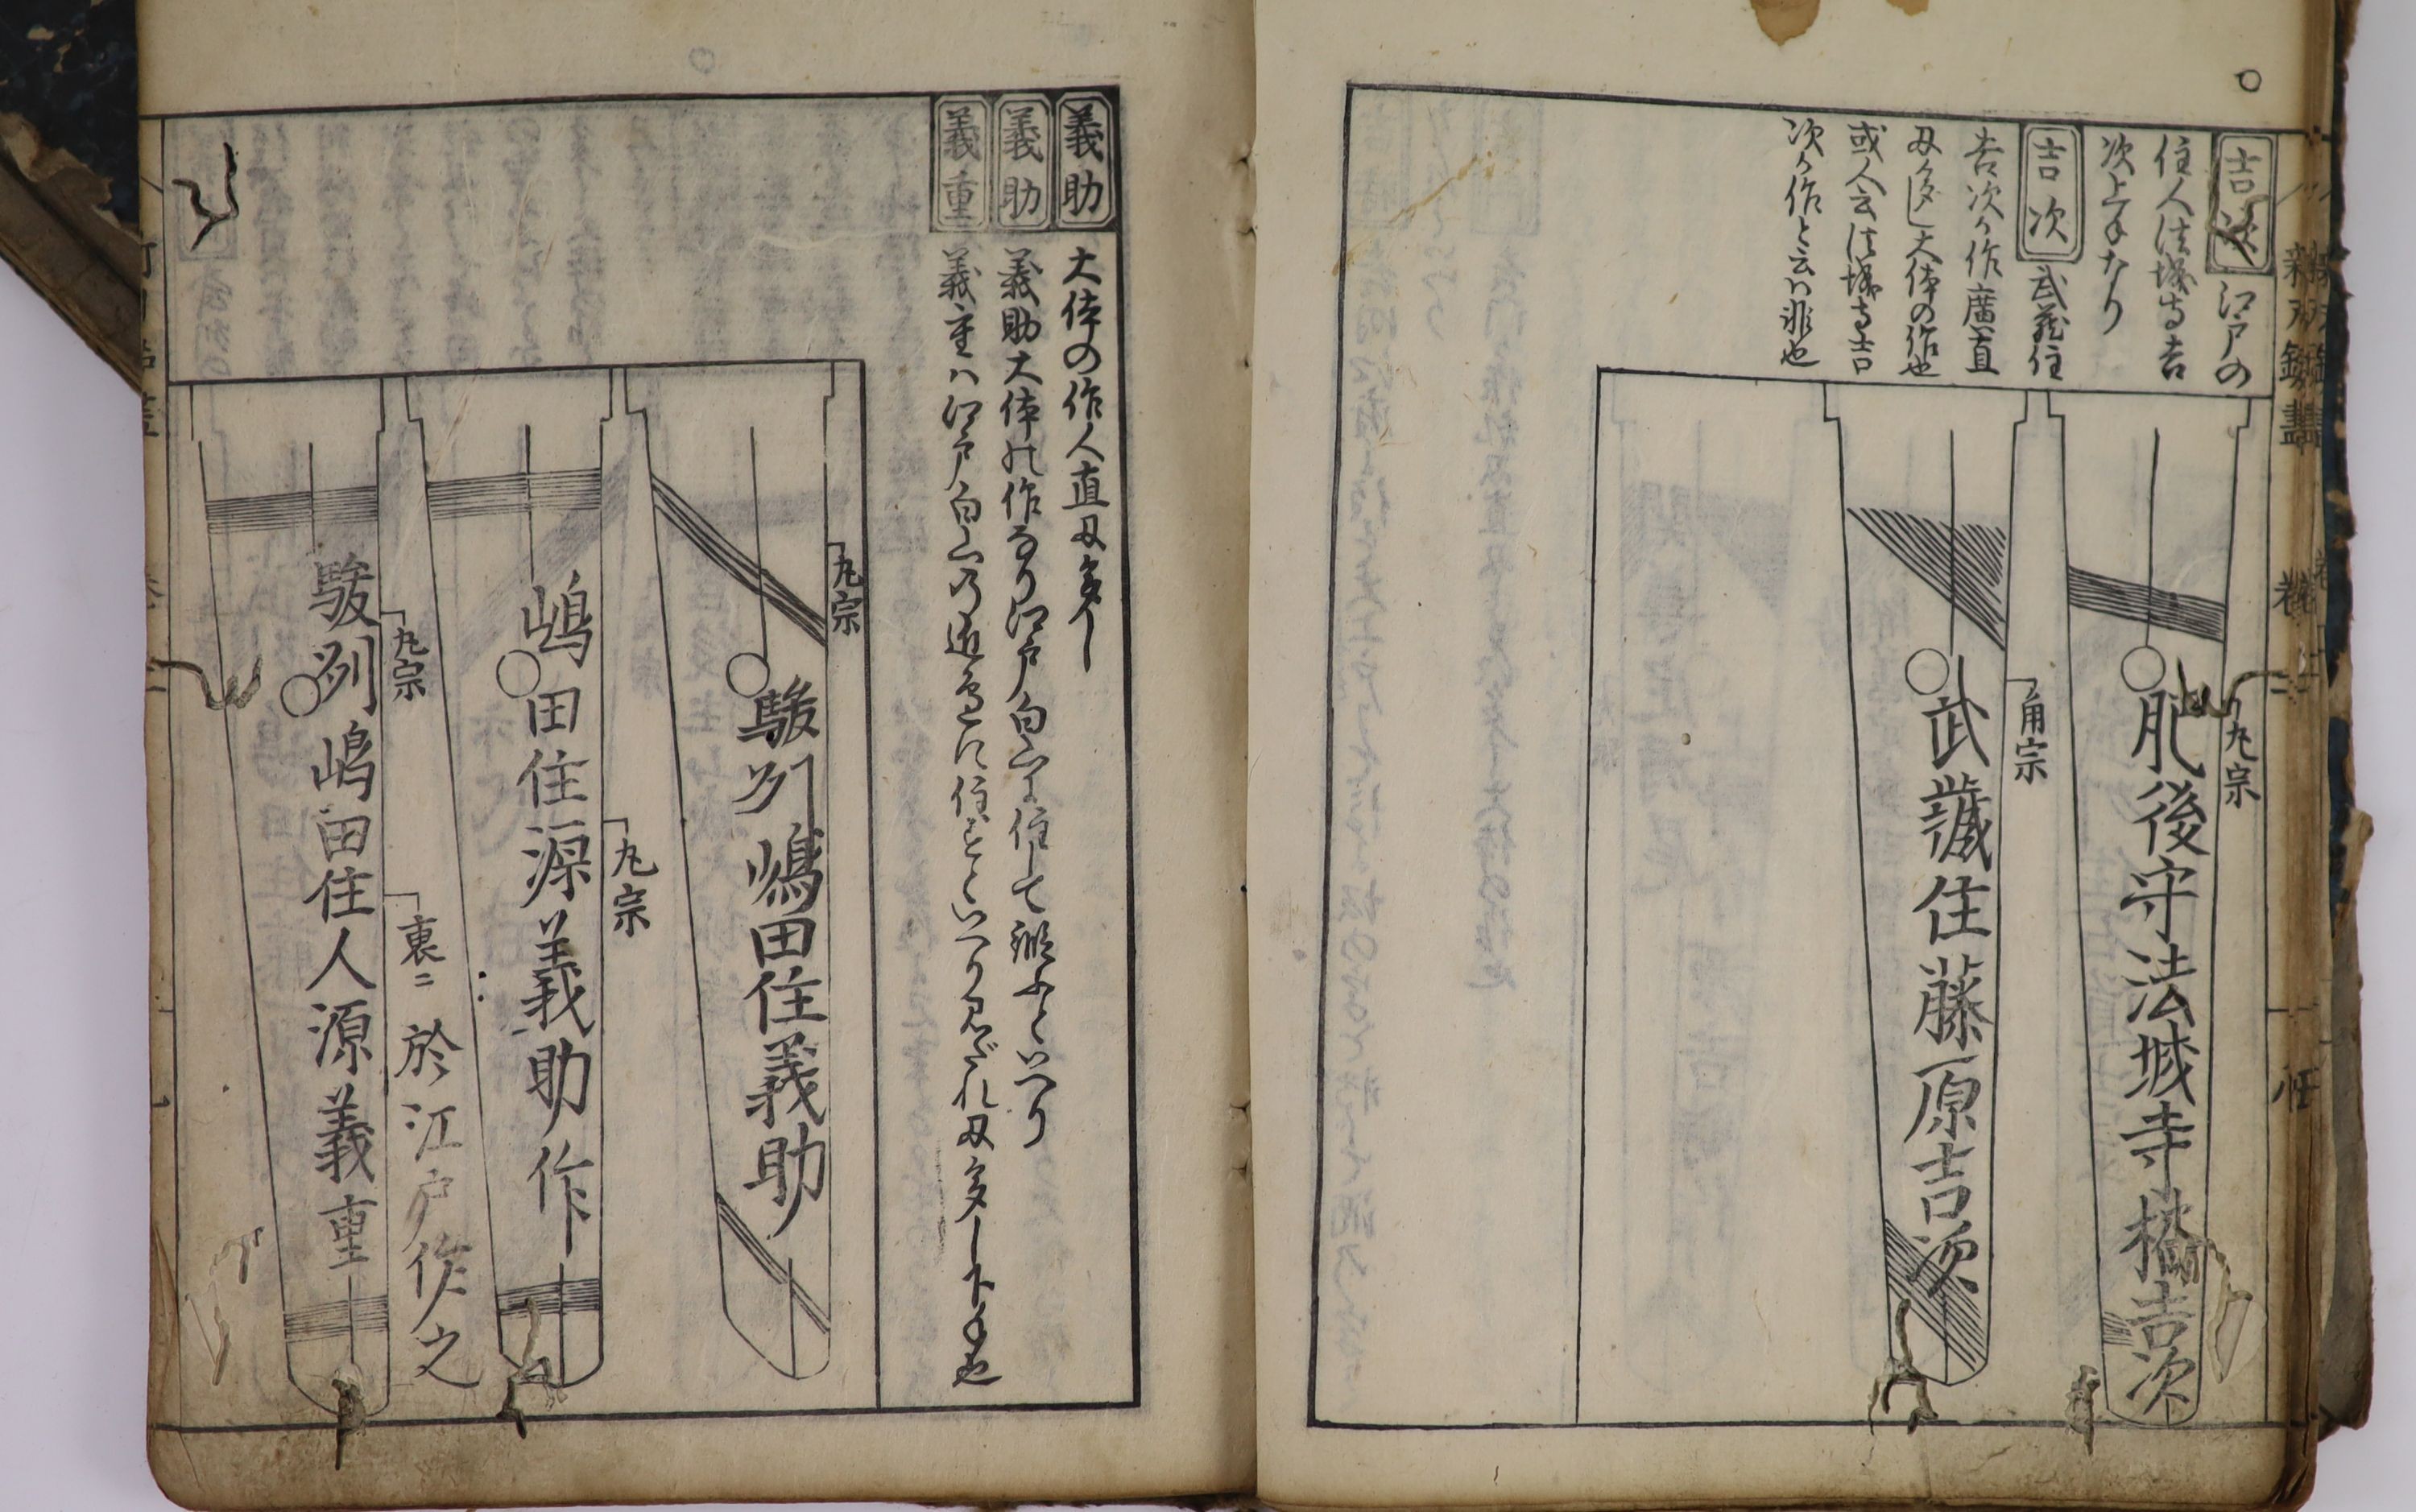 A set of five Japanese woodblock printed books of Samurai sword tang designs and examples of maker's marks, 19th century, 26.5 cm x 18 cm, faults